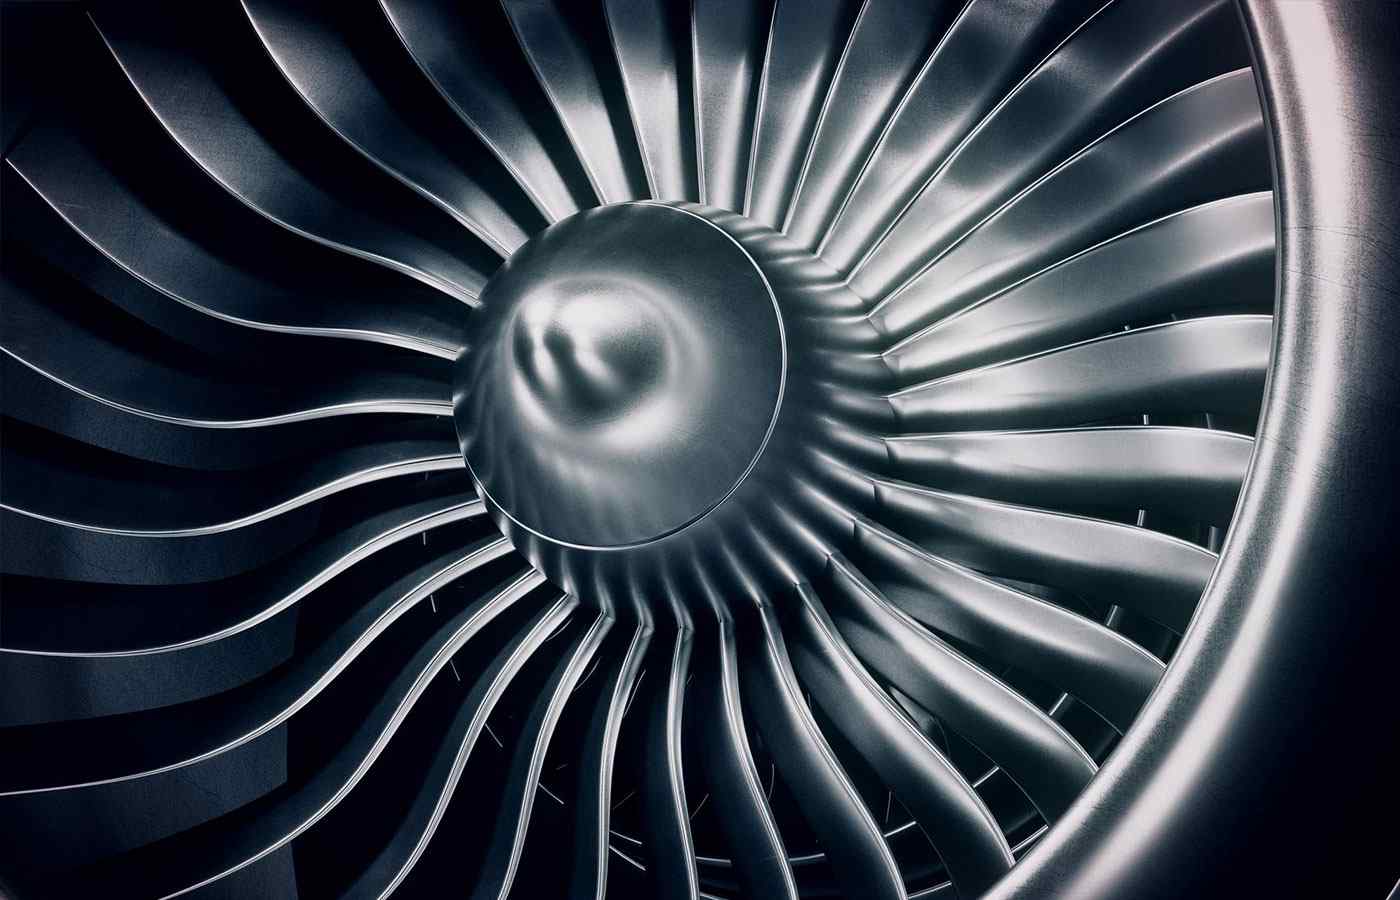 Is buying Rolls-Royce (RR) shares a good investment?